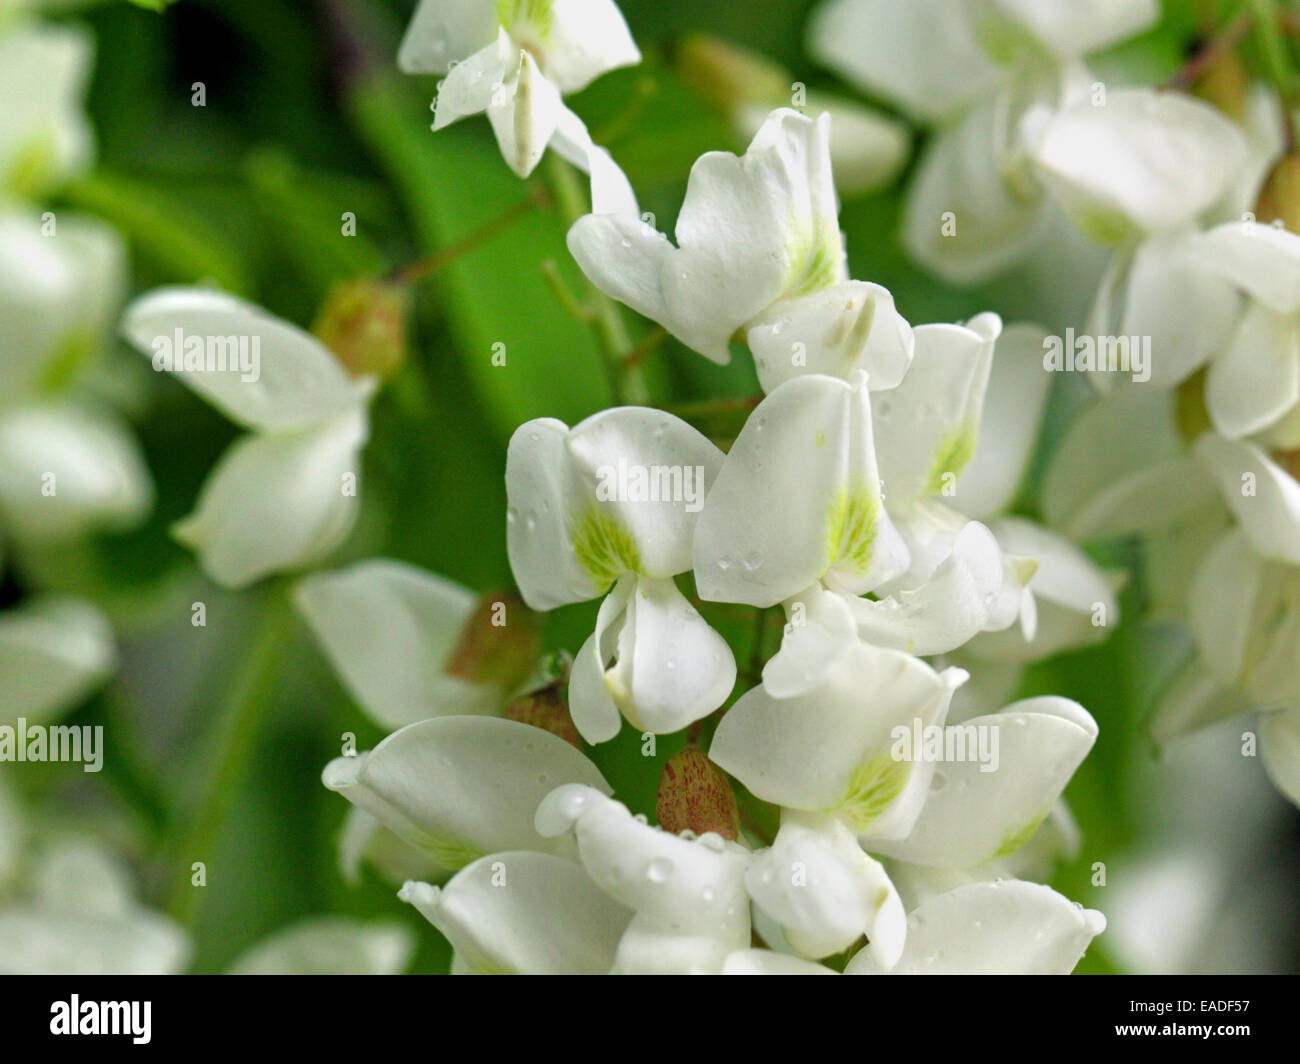 white flowers are photographed close up on a green background Stock Photo